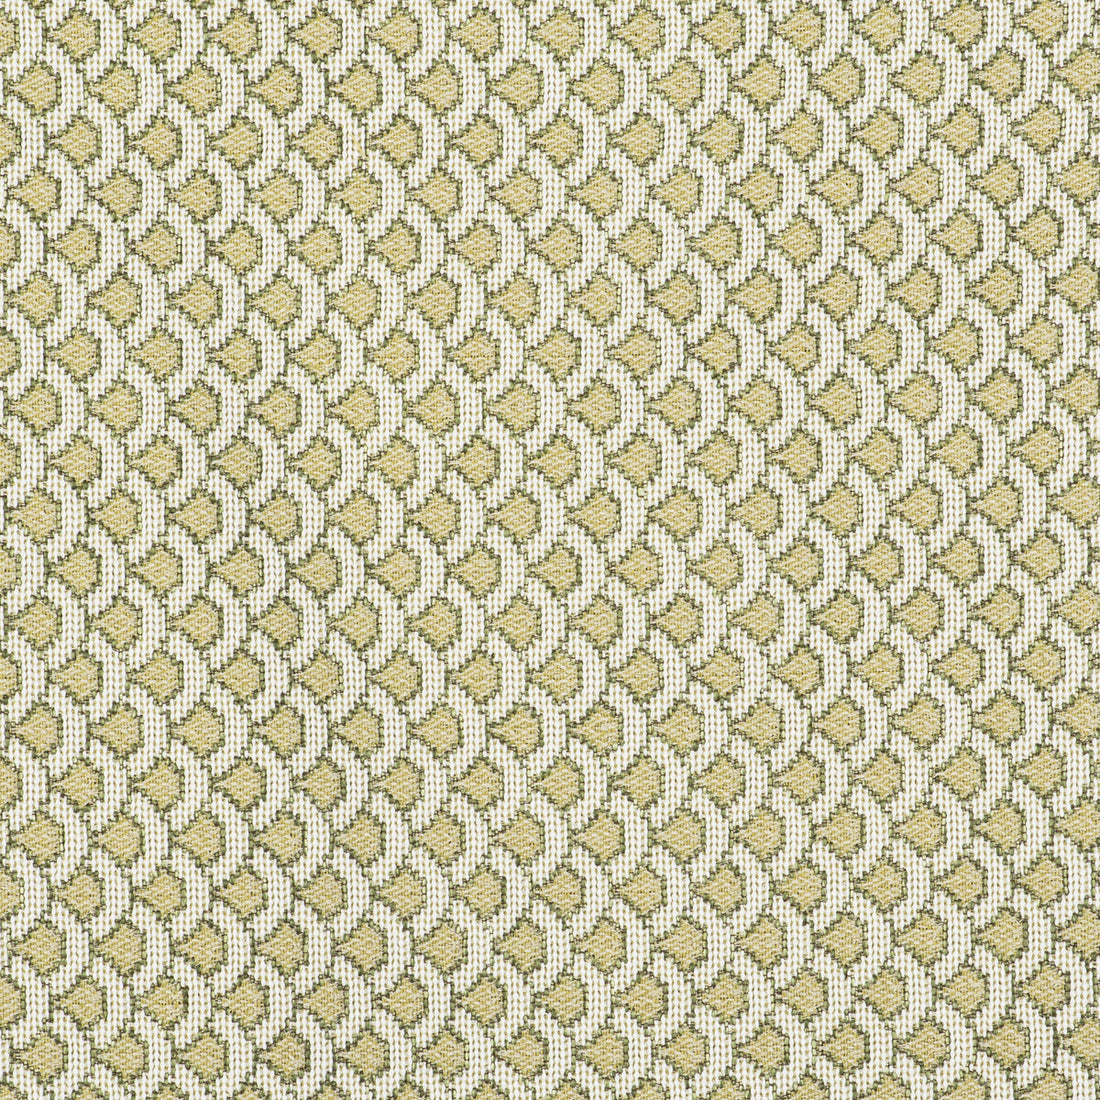 Ondas fabric in verde color - pattern GDT5511.003.0 - by Gaston y Daniela in the Gaston Libreria collection